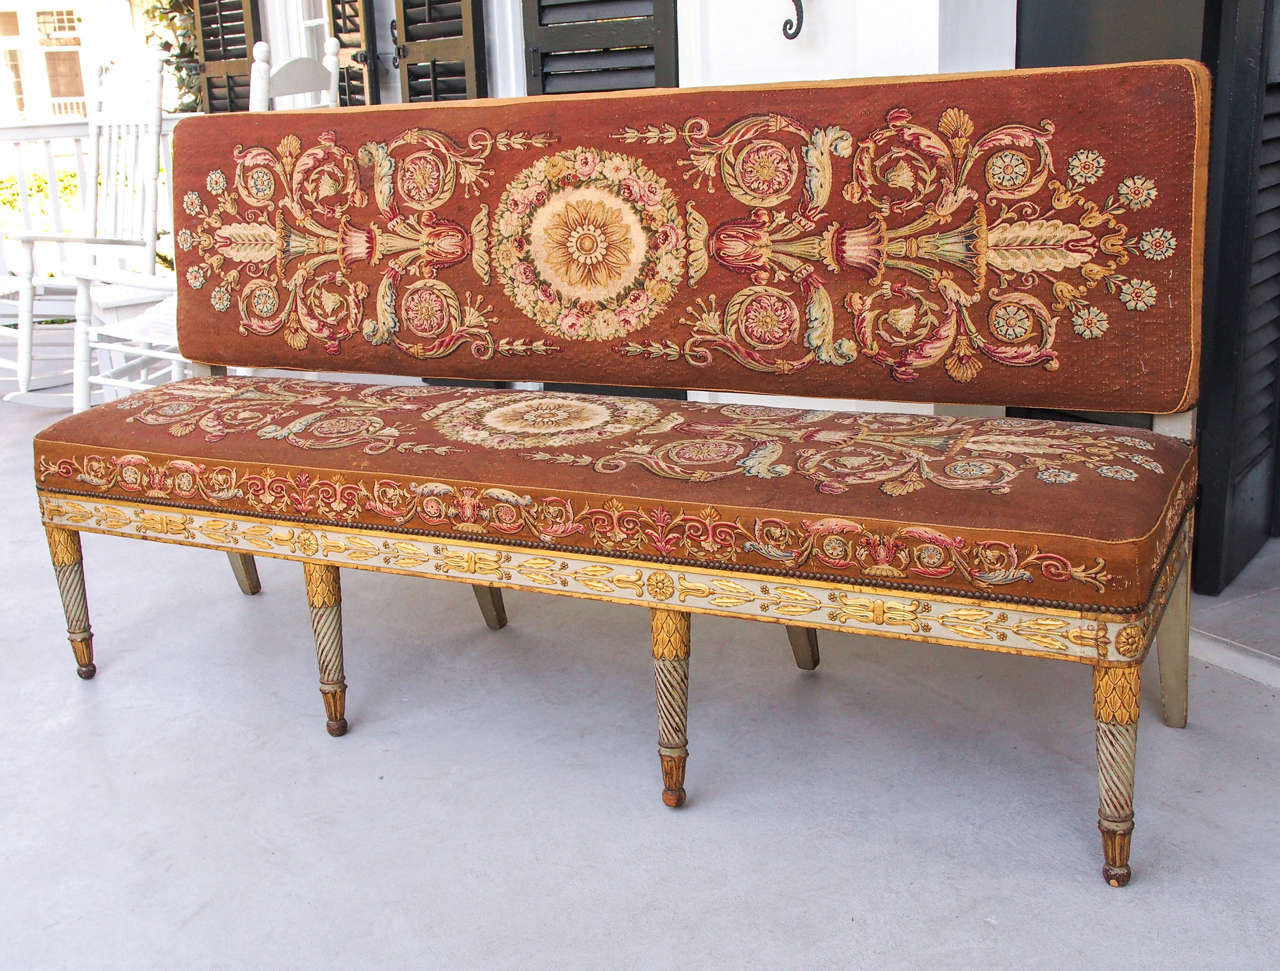 Painted Exceptional French Empire Aubusson Covered Hall Bench